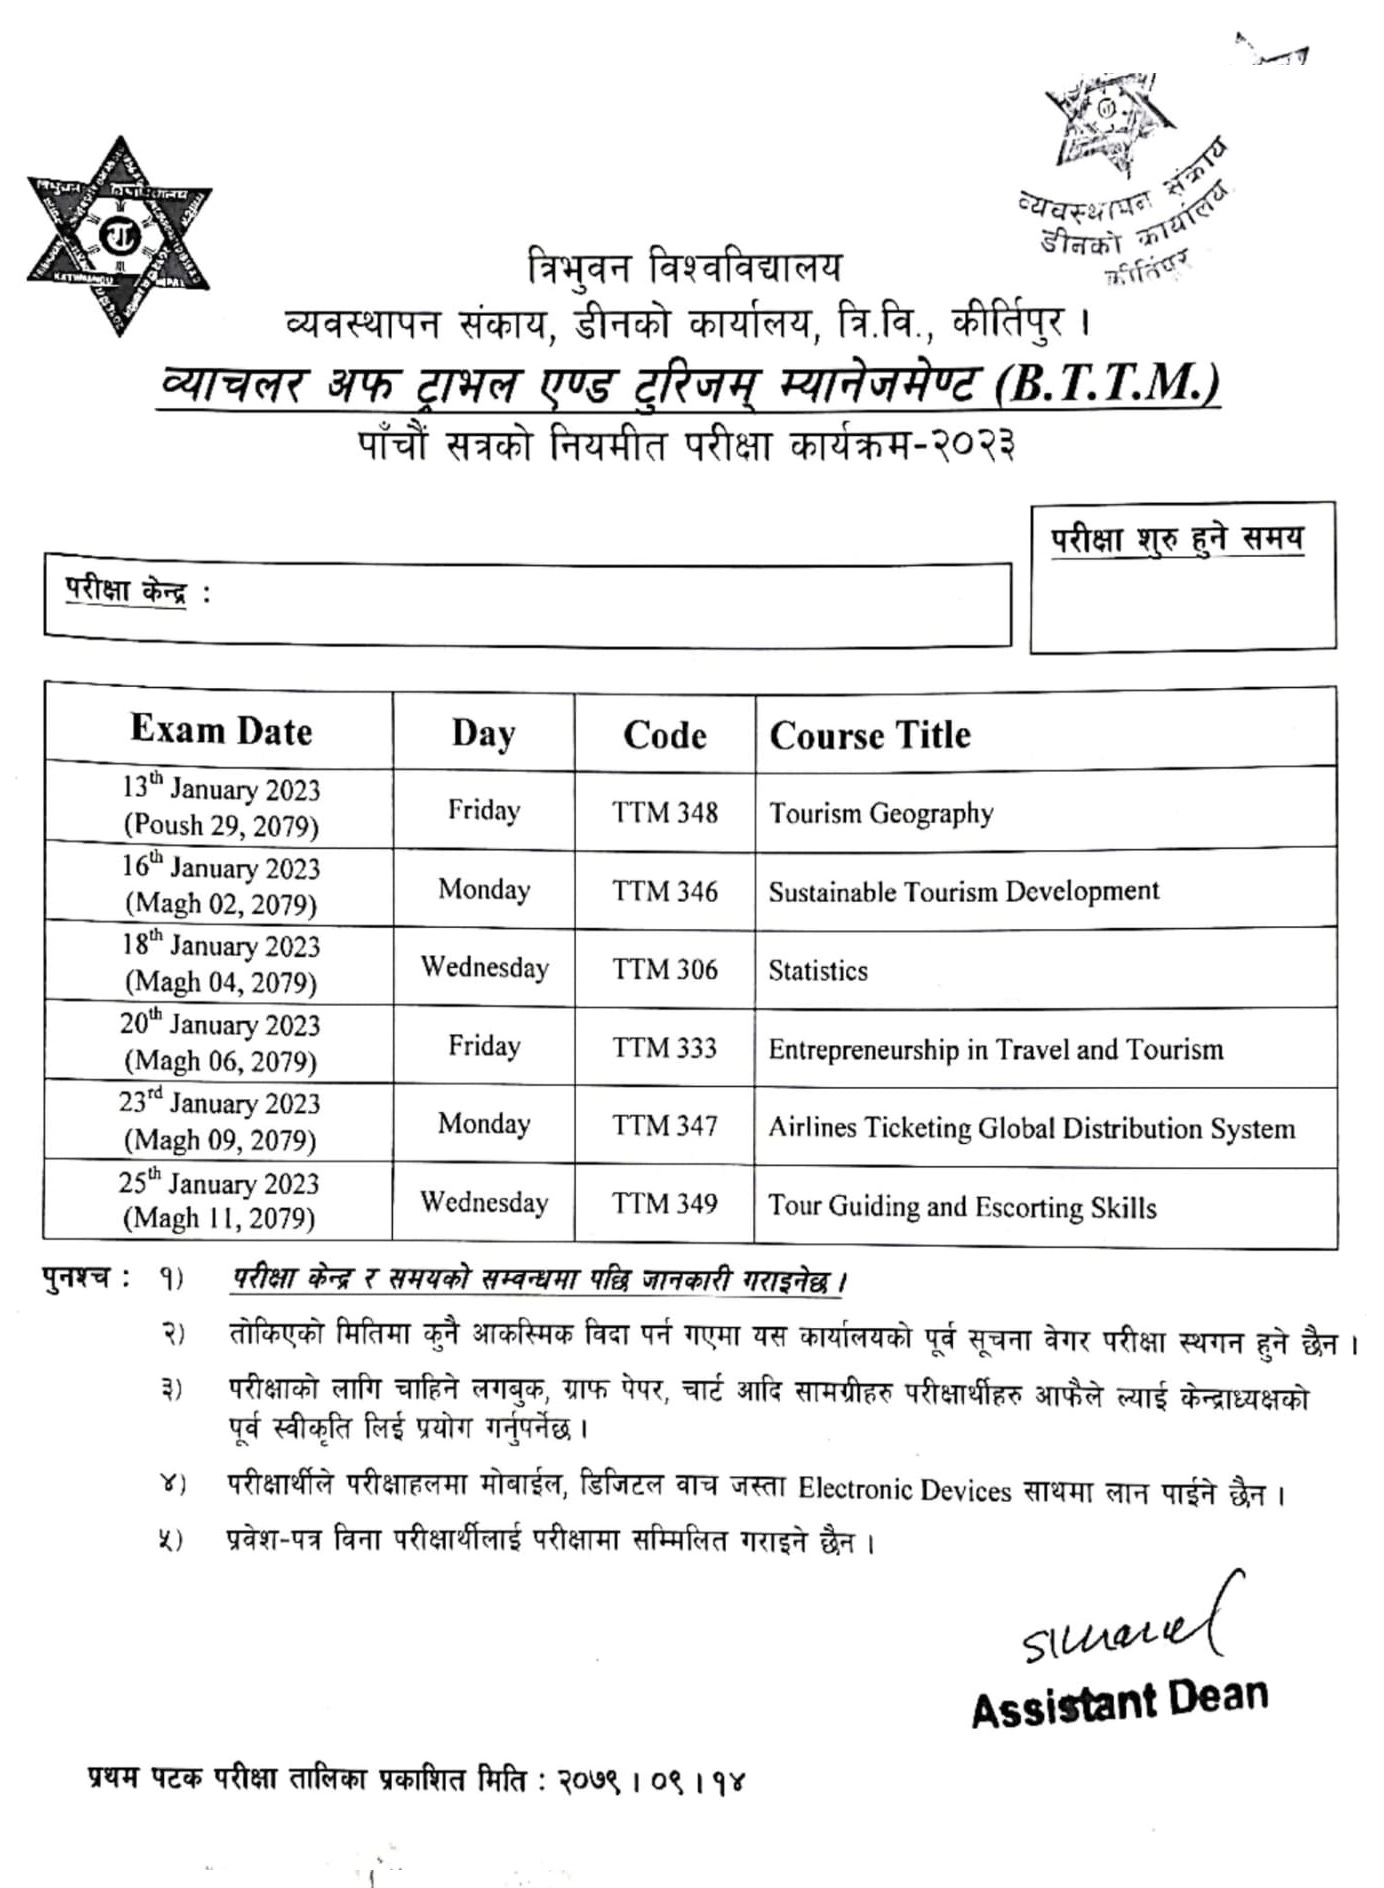 Tribhuvan University Faculty of Management, Dean's Office, Tribhuvan University, Kirtipur. Bachelor of Travel and Tourism Management (B.T.T.M.) Fifth Session Regular Exam Schedule 2023. 